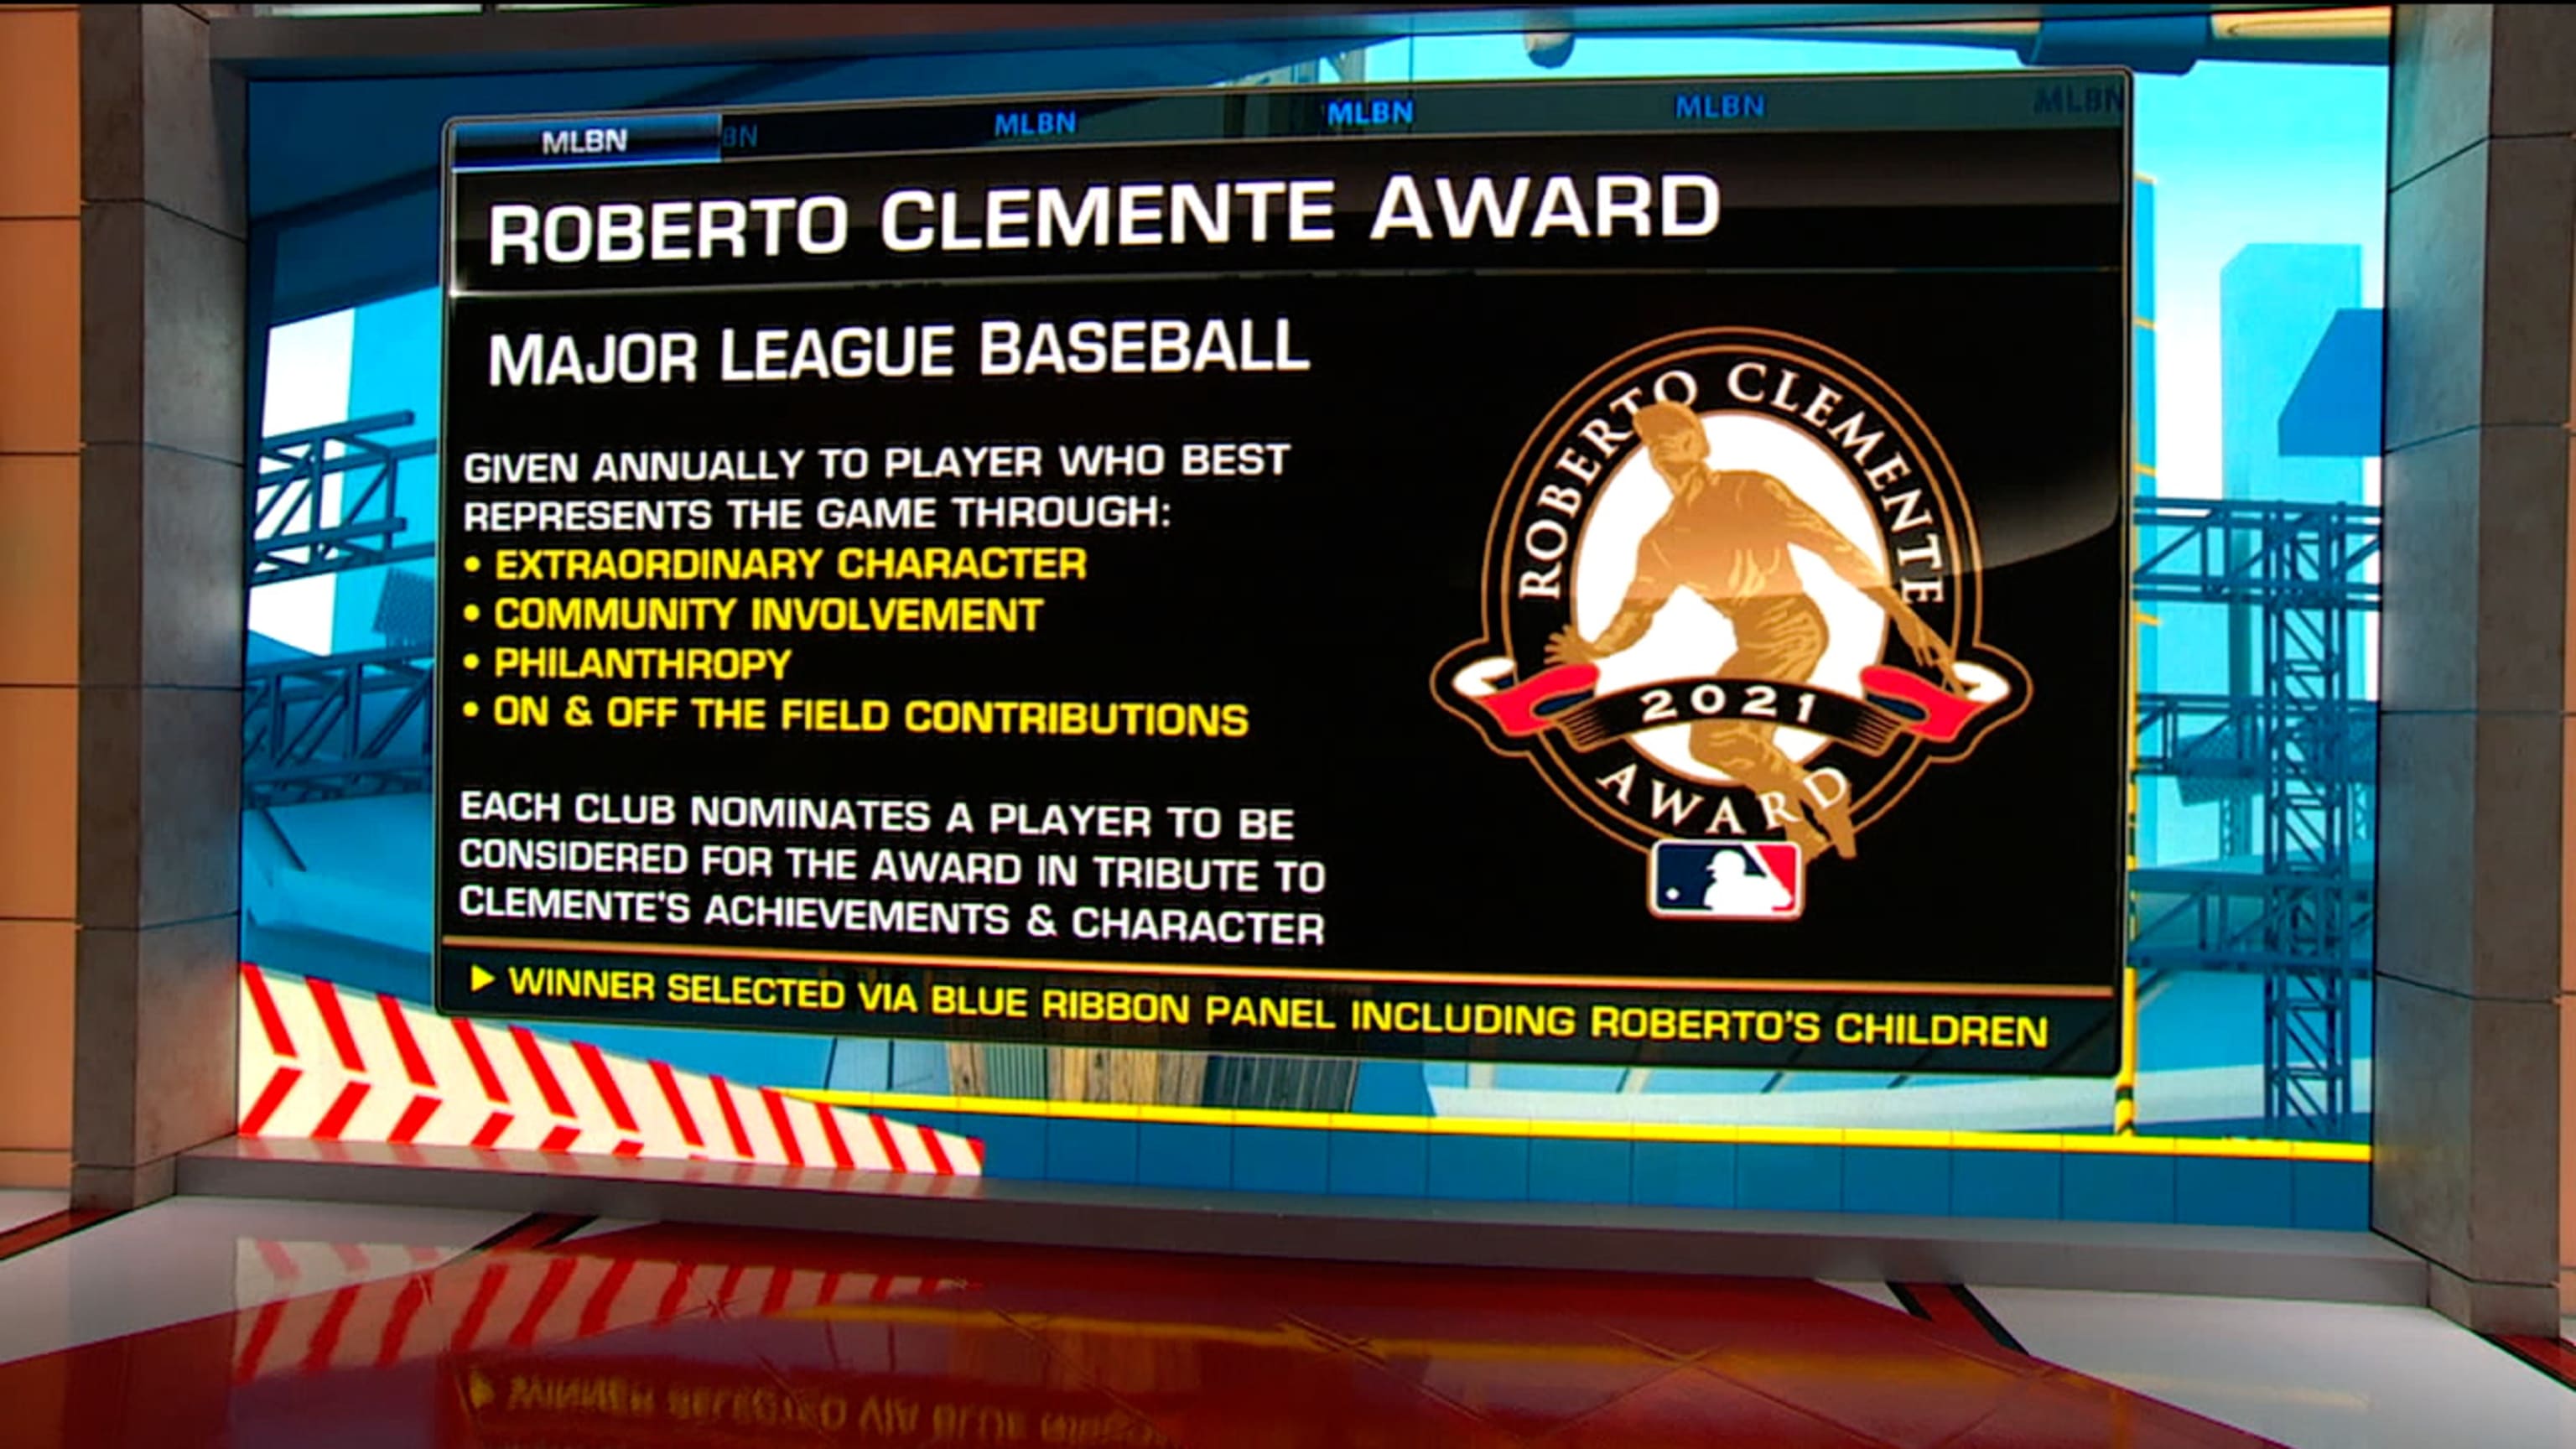 SF Giants: Vote Brandon Crawford for the Roberto Clemente Award